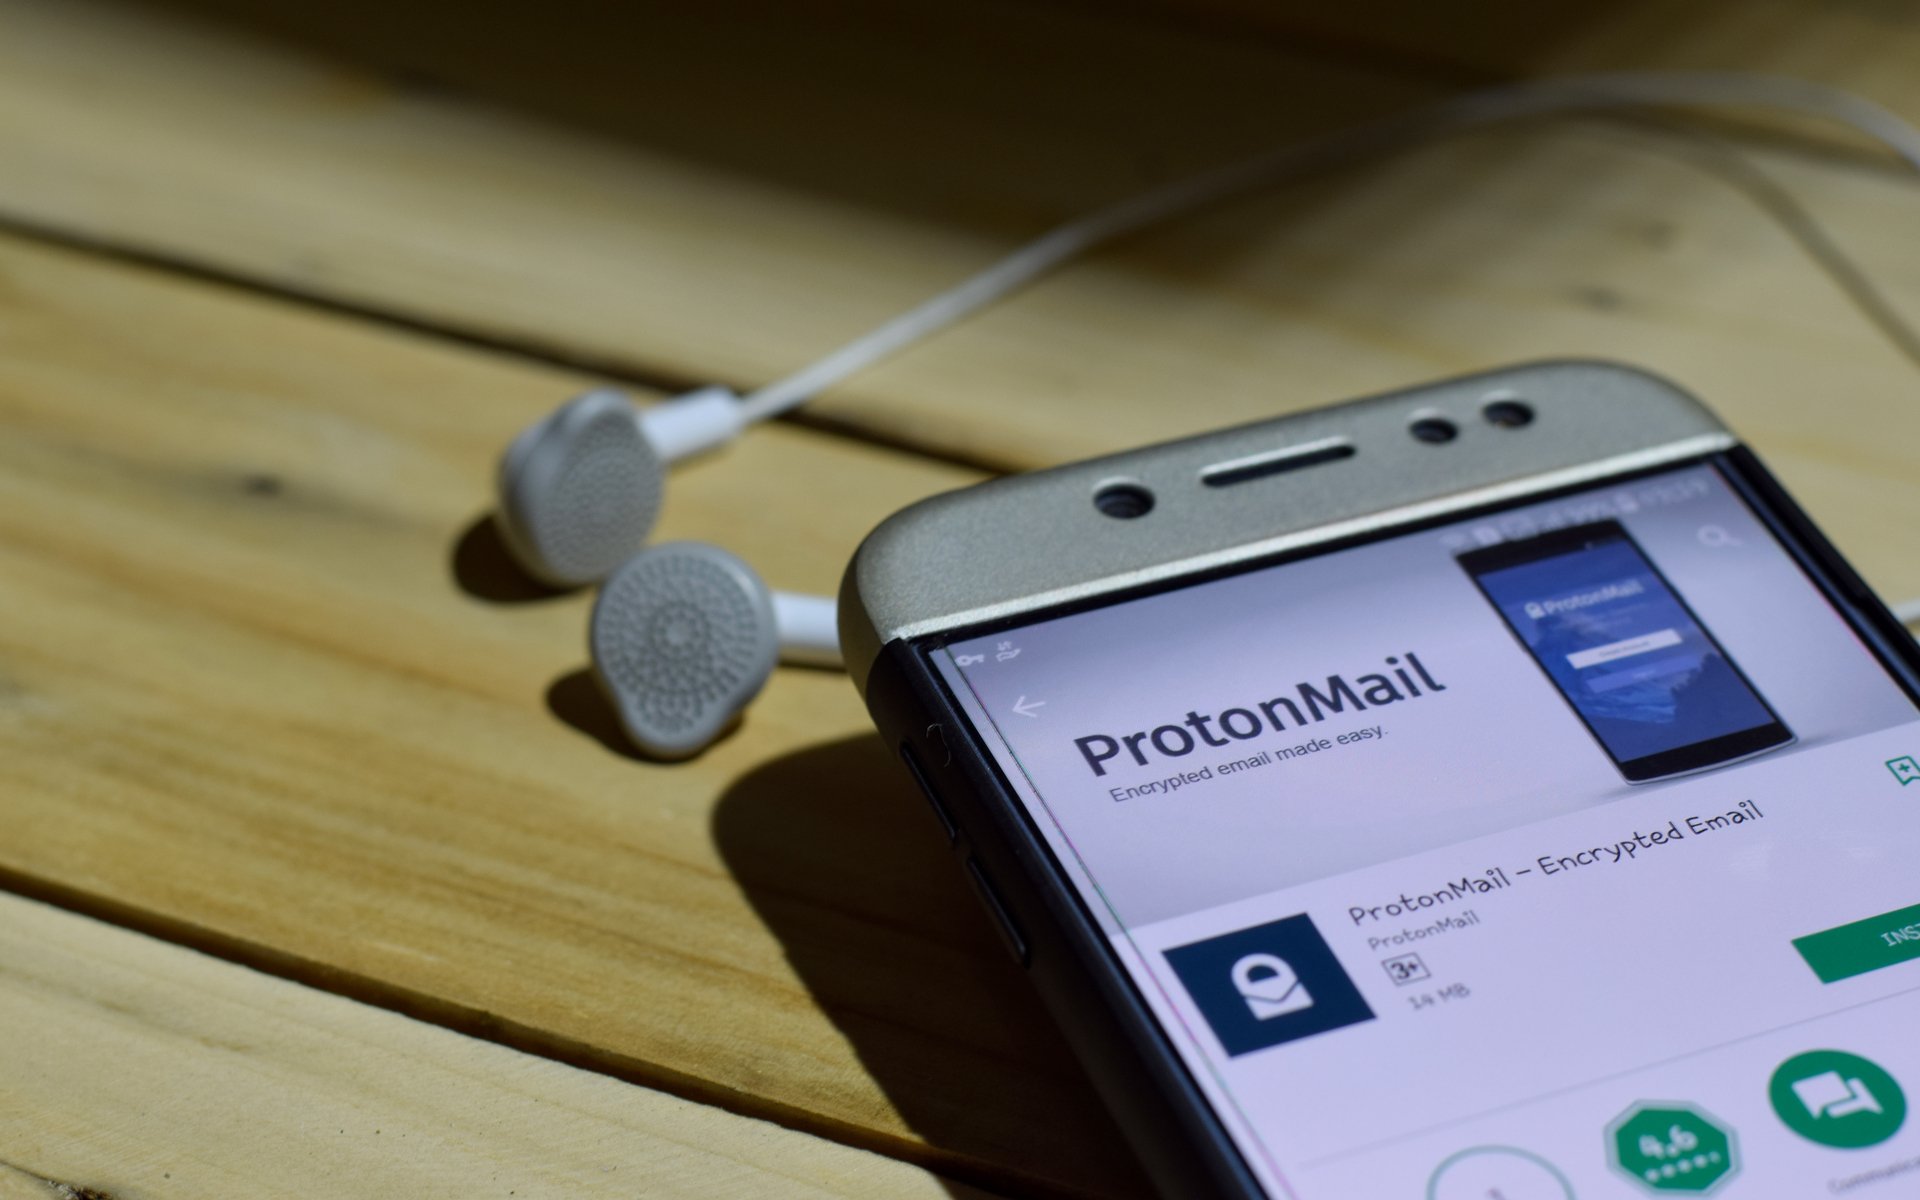 Protonmail Hints at Possible 'Proton Shares' ICO ...